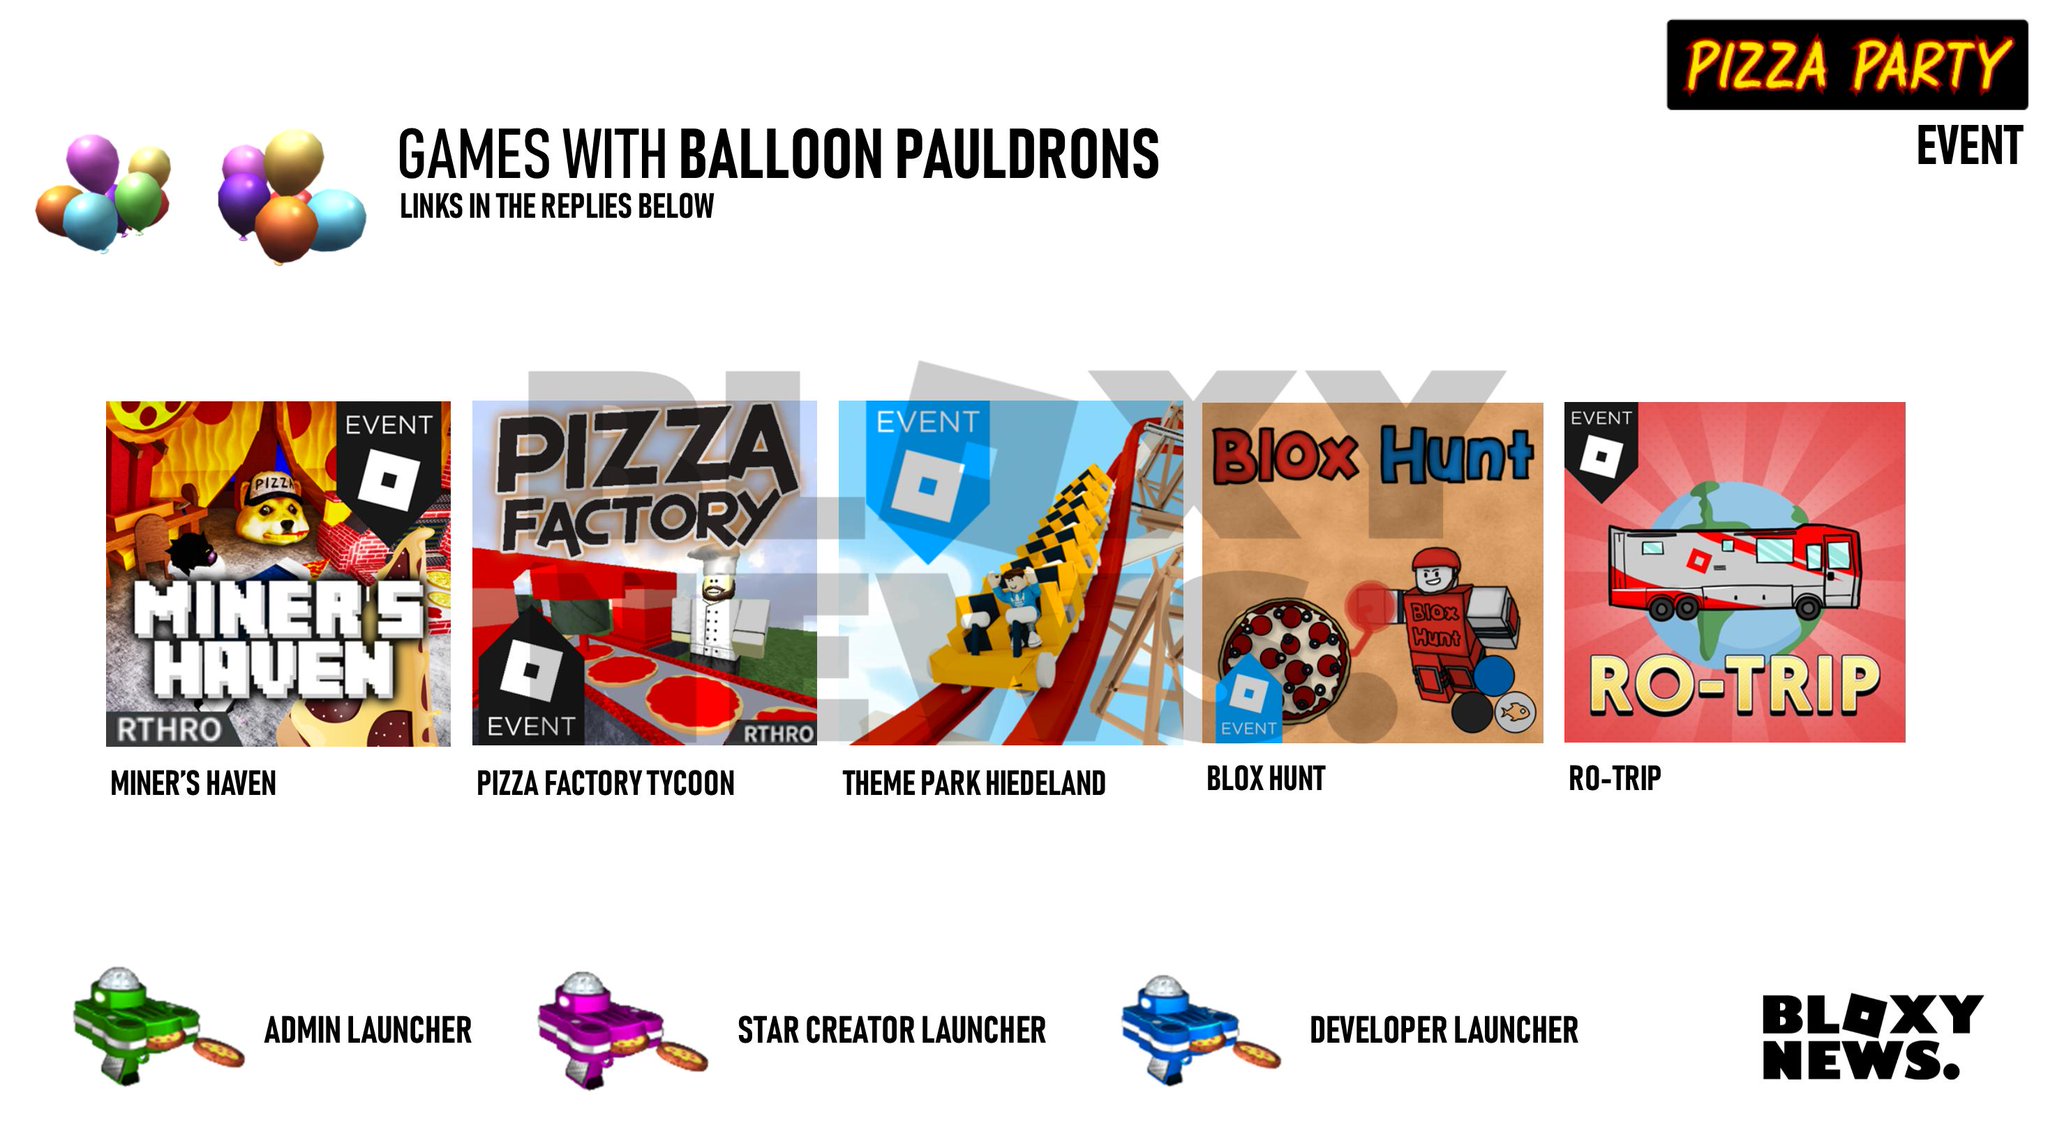 Bloxy News On Twitter To Get The Balloon Pauldrons Join Any Of